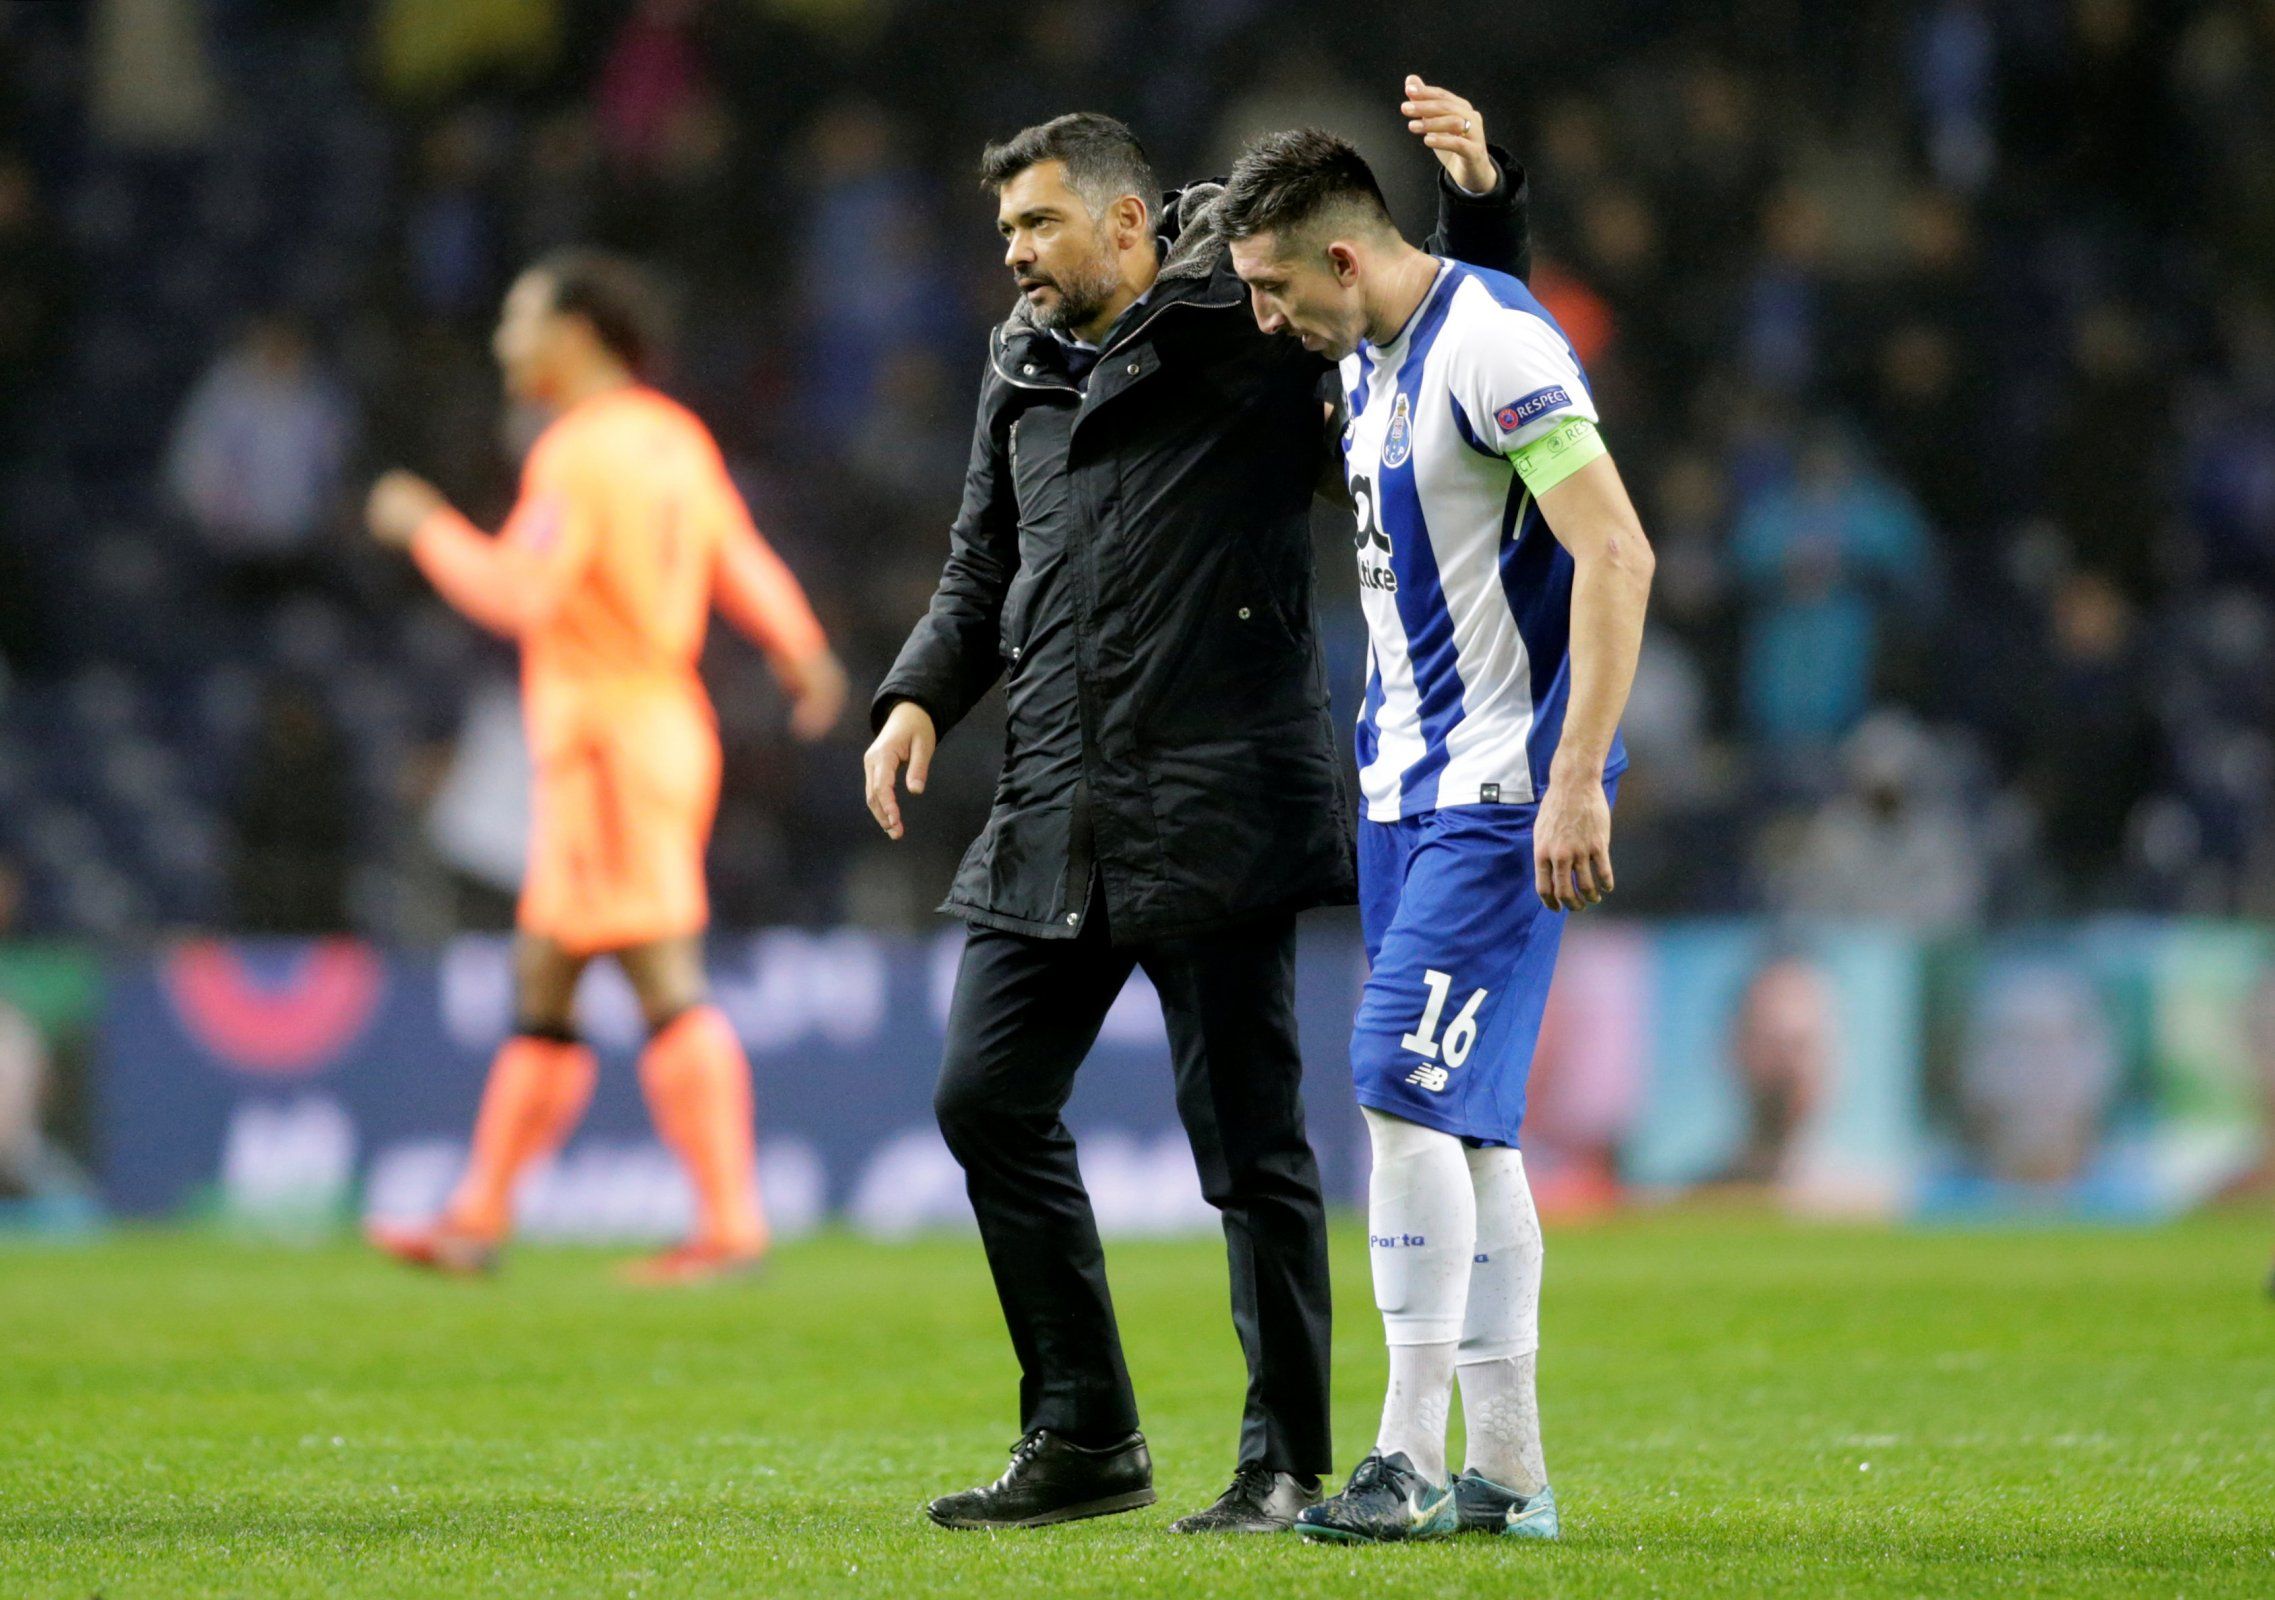 Sergio Conceiao consoles one of his Porto players